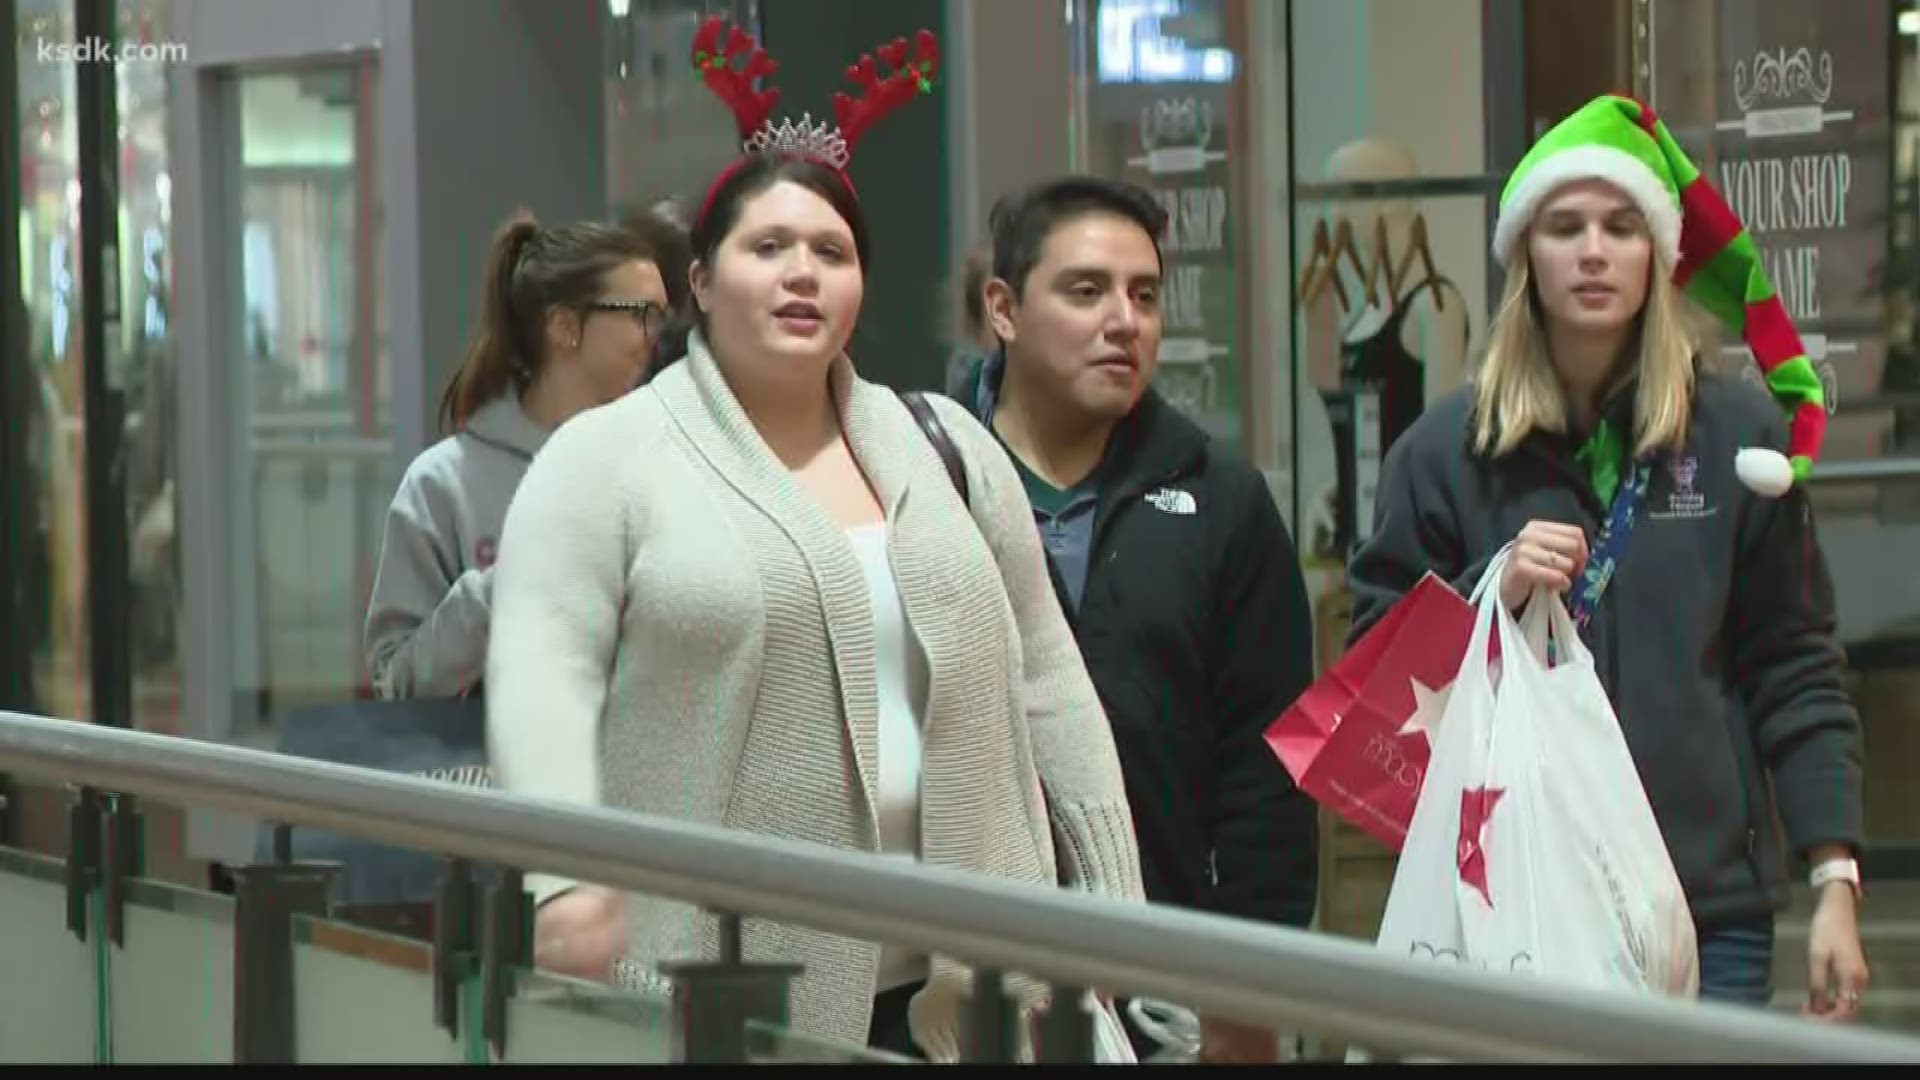 Black Friday has become a holiday tradition for many.